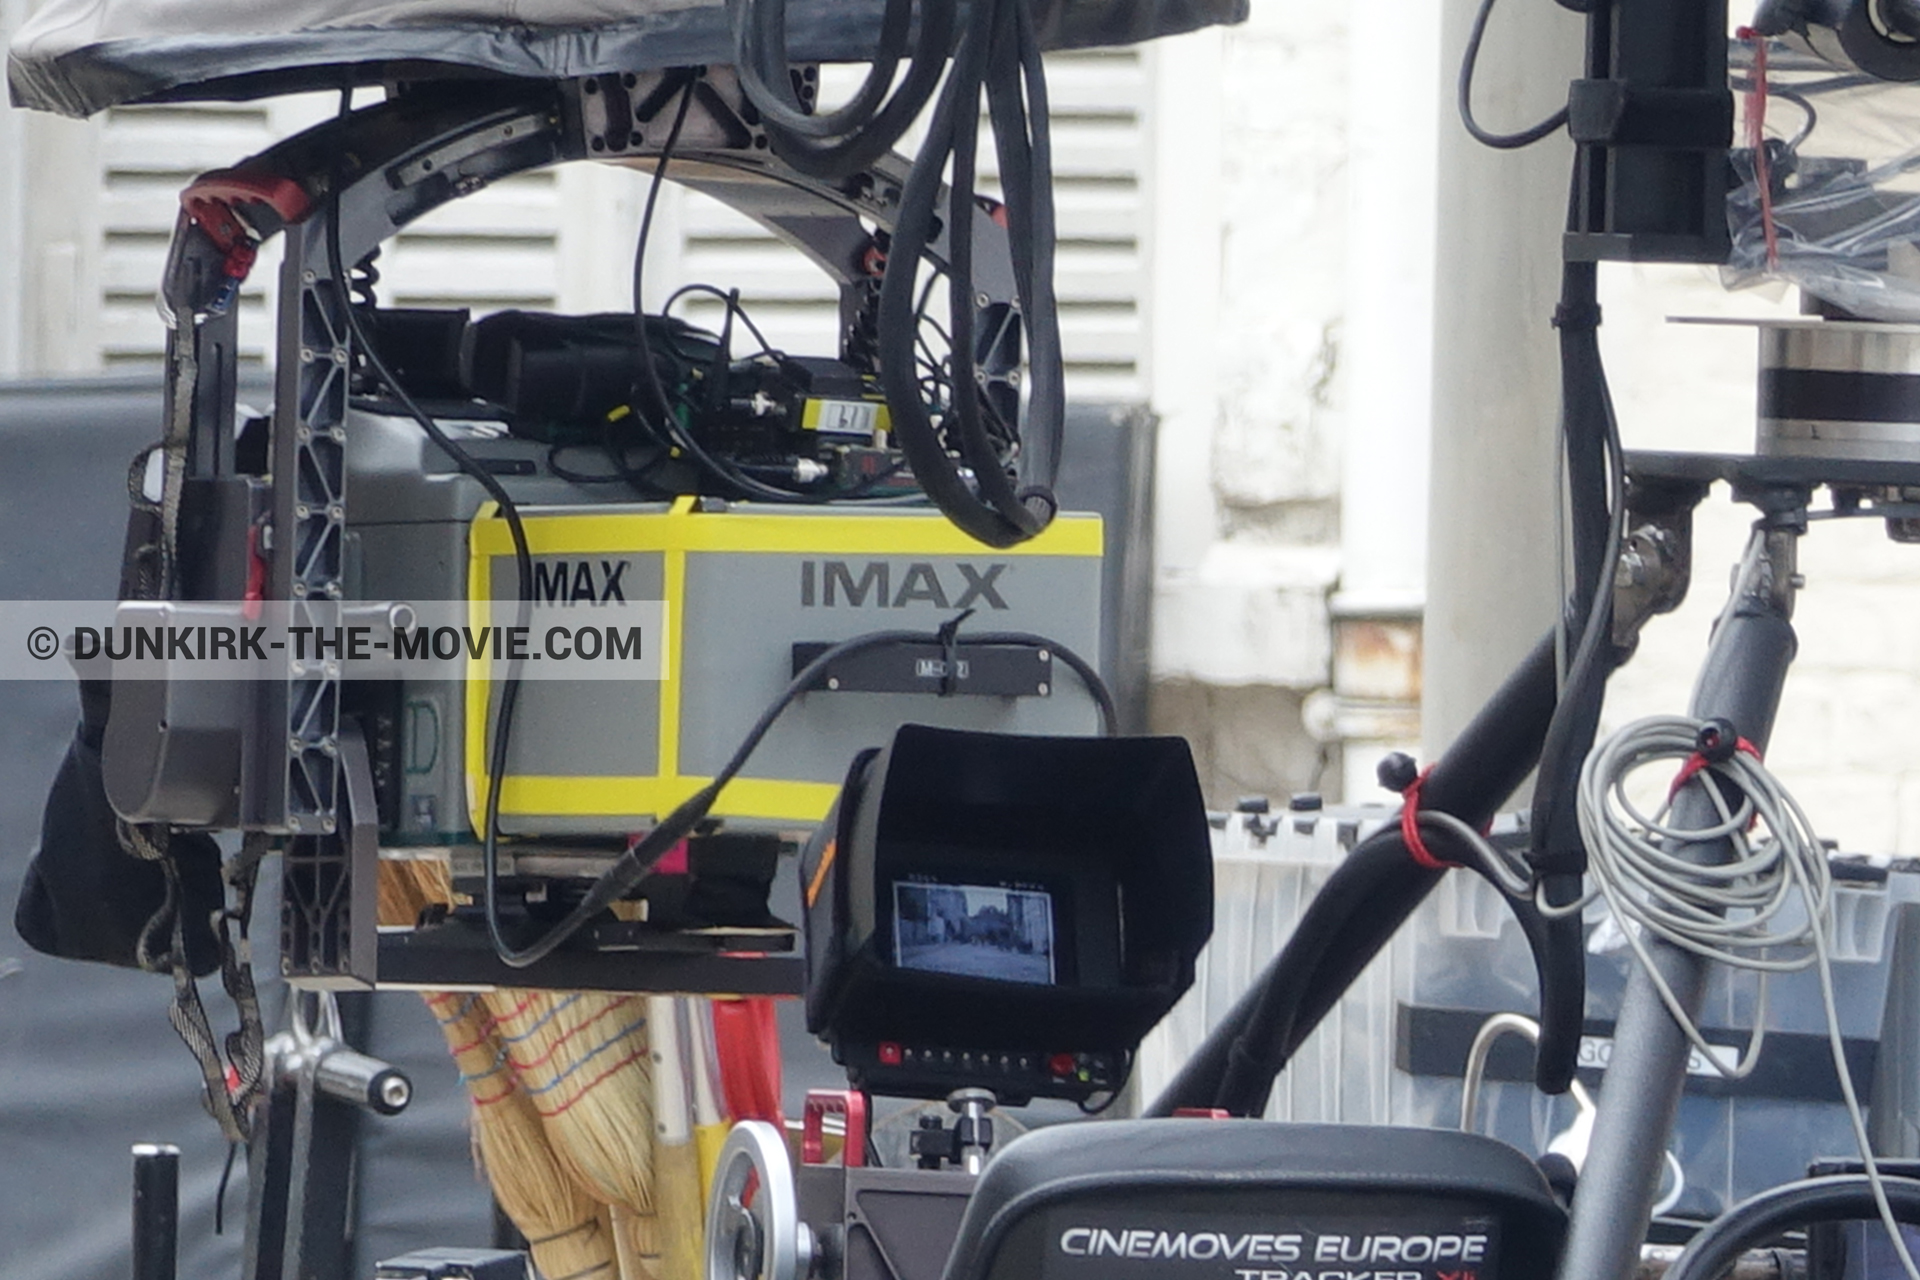 Picture with IMAX camera, Belle Rade street,  from behind the scene of the Dunkirk movie by Nolan